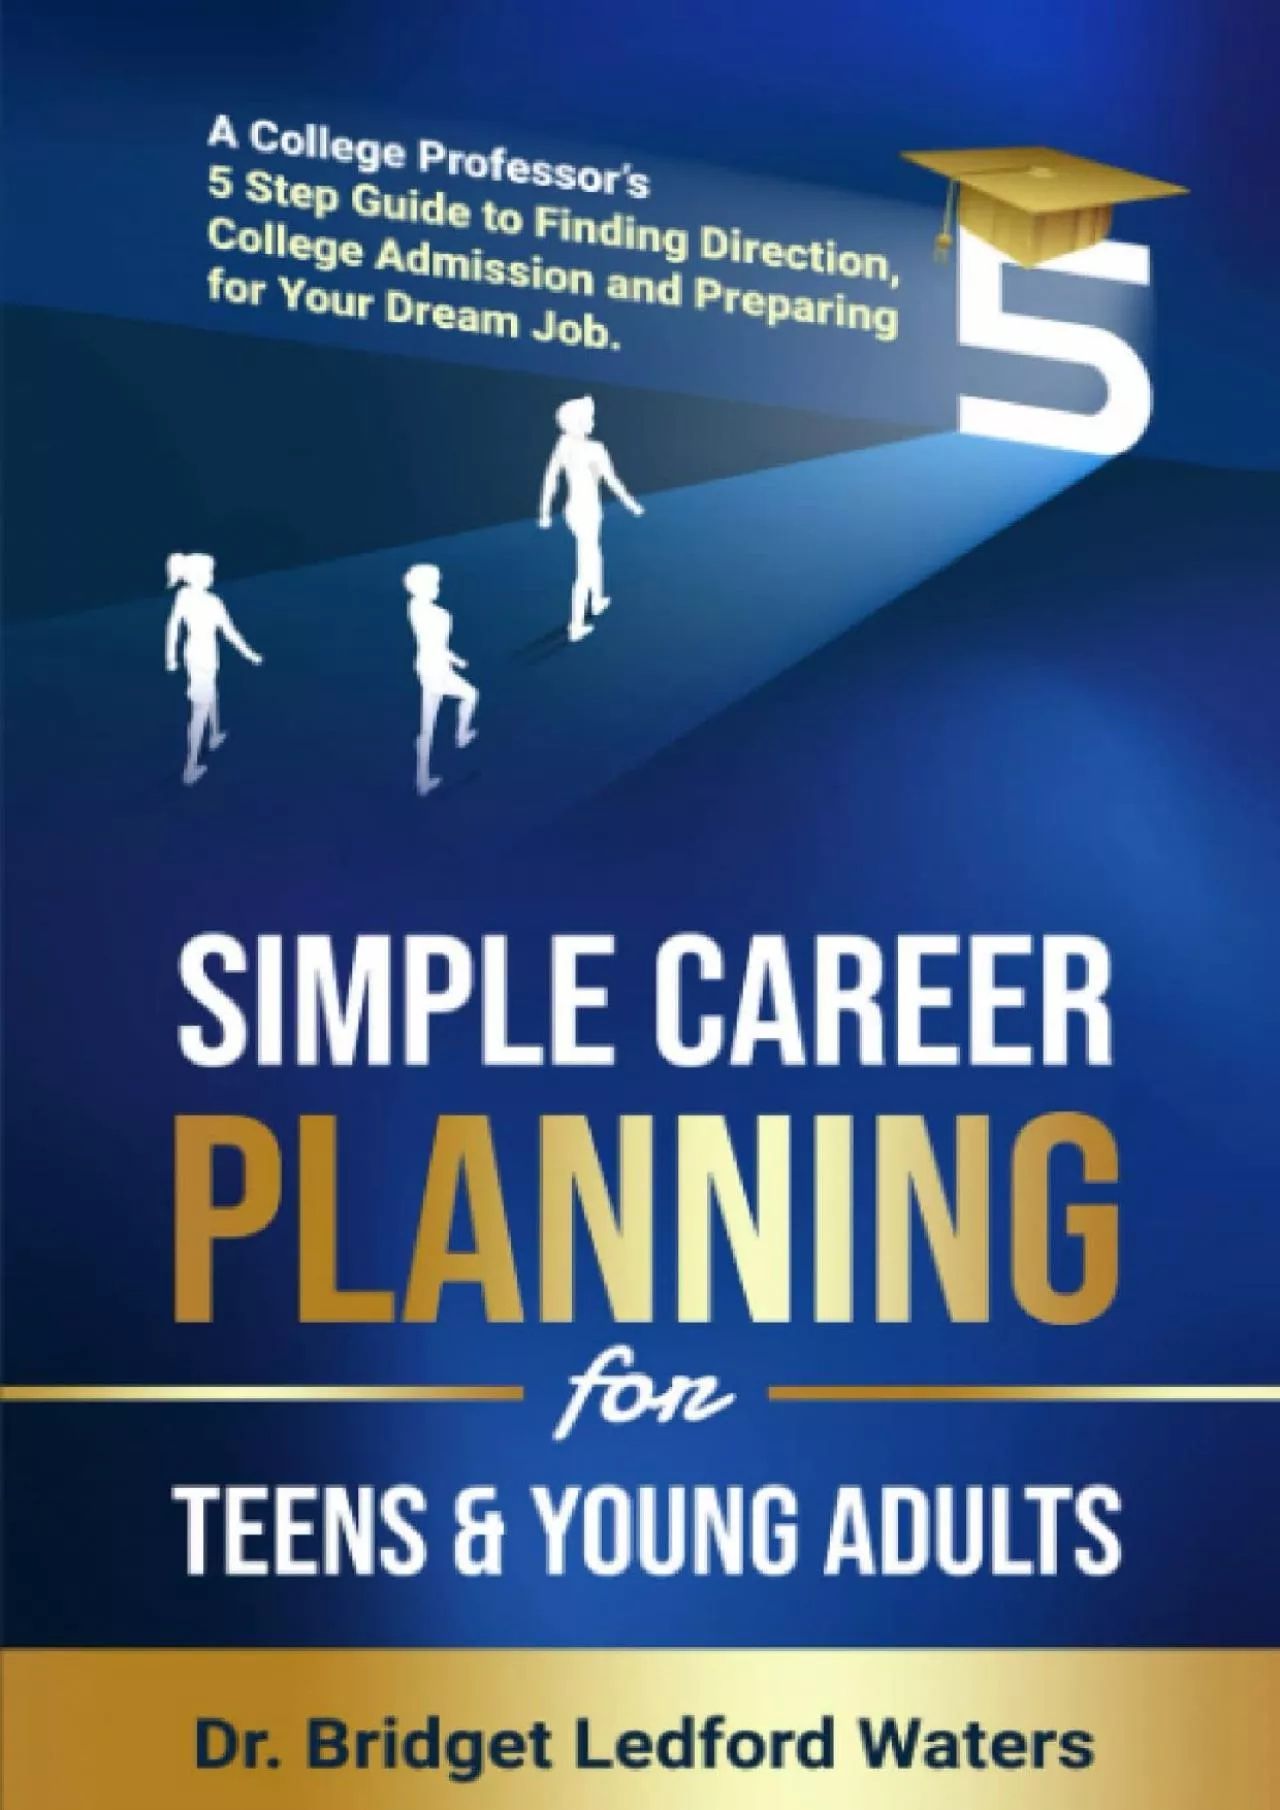 [READ] Simple Career Planning for Teens and Young Adults: A College Professor’s Five-Step